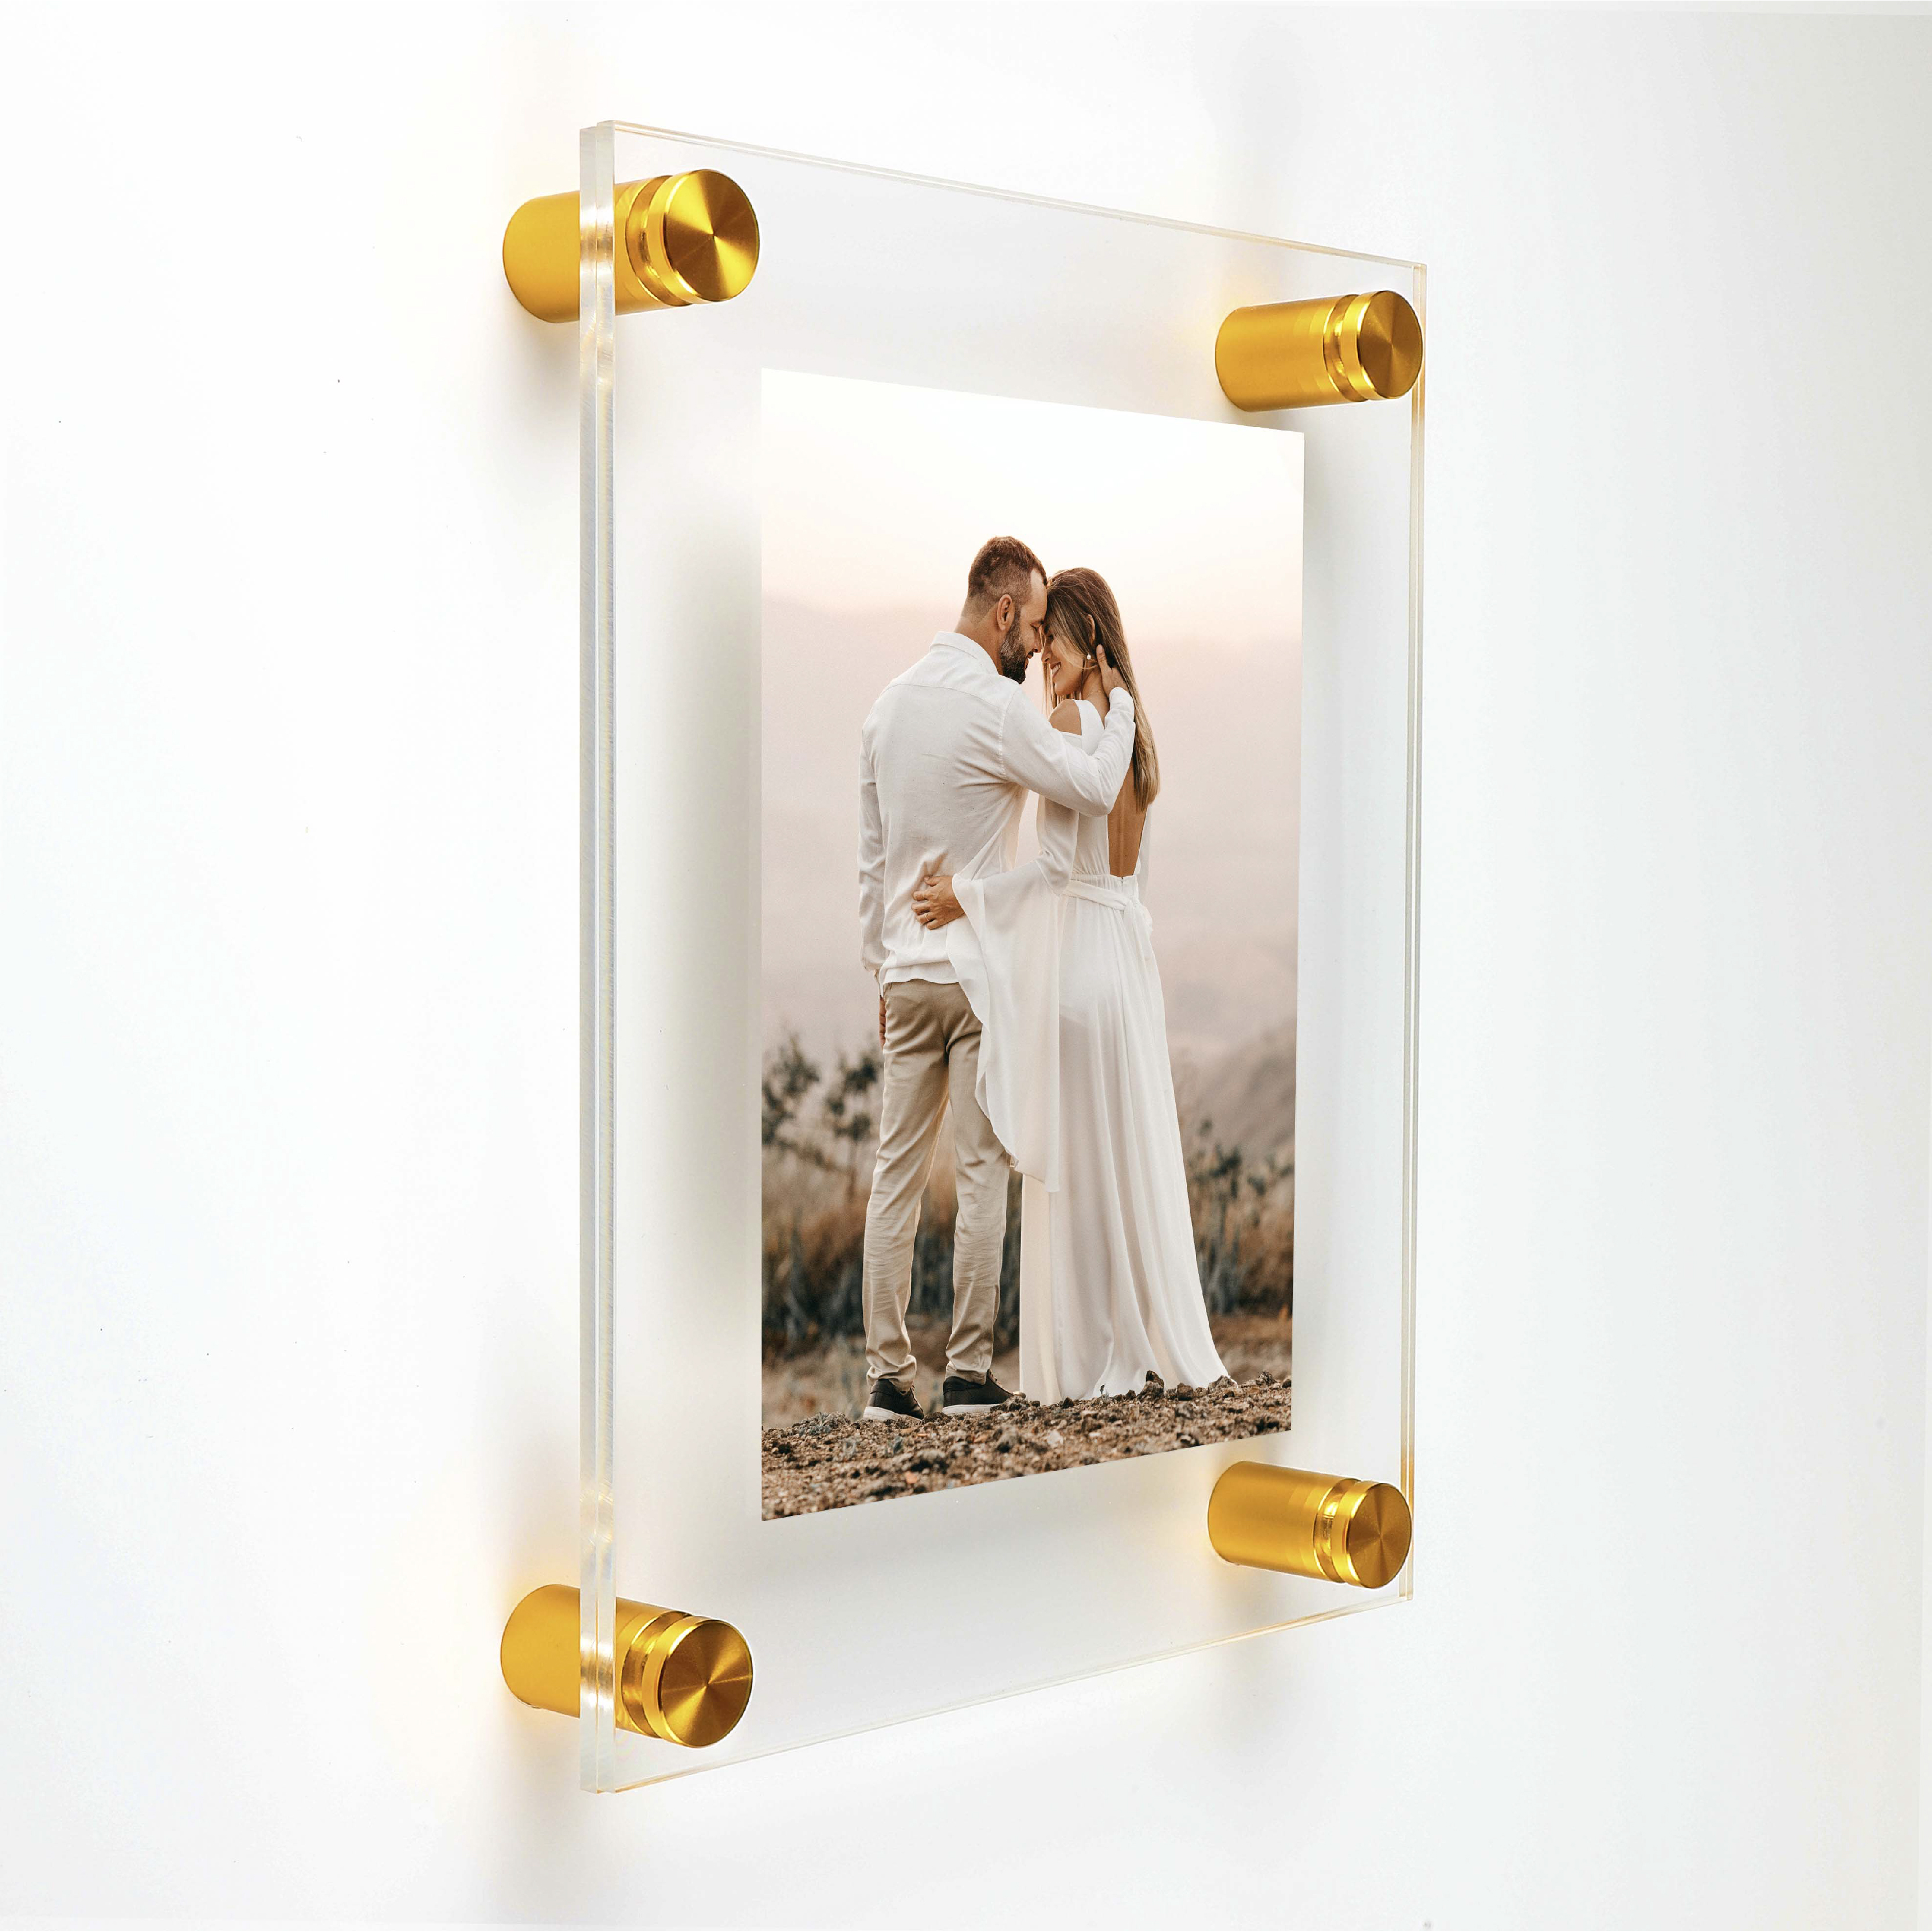 (2) 13-1/2'' x 19-1/2'' Clear Acrylics , Pre-Drilled With Polished Edges (Thick 3/16'' each), Wall Frame with (4) 3/4'' x 1'' Gold Anodized Aluminum Standoffs includes Screws and Anchors